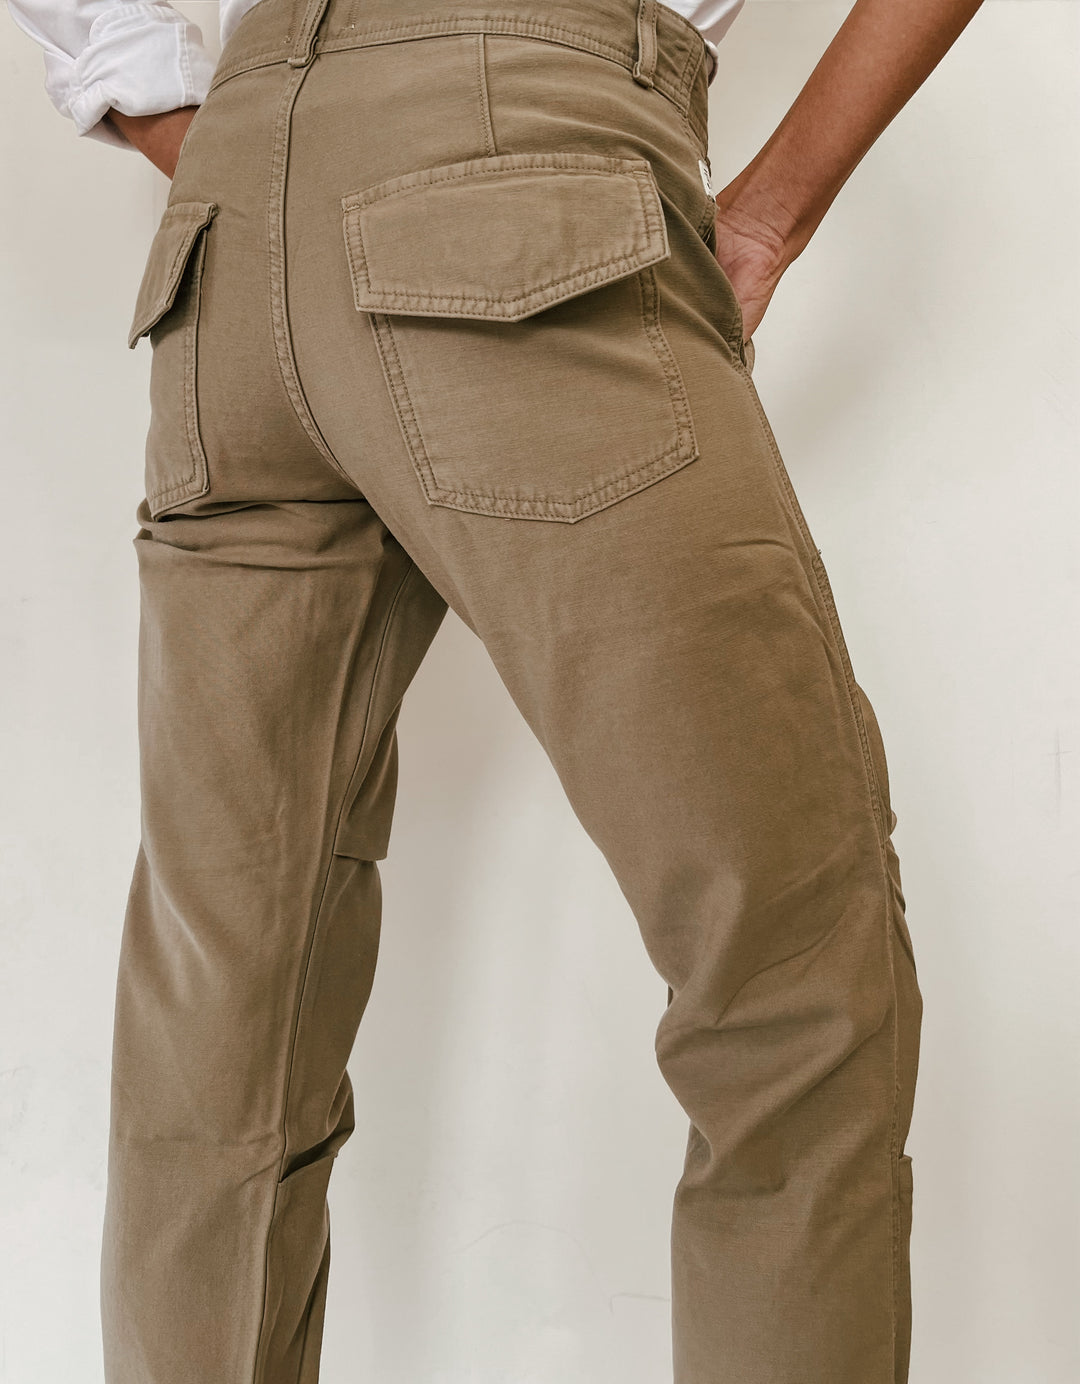 Citizens of Humanity - Agni Utility Trouser in Cocolette